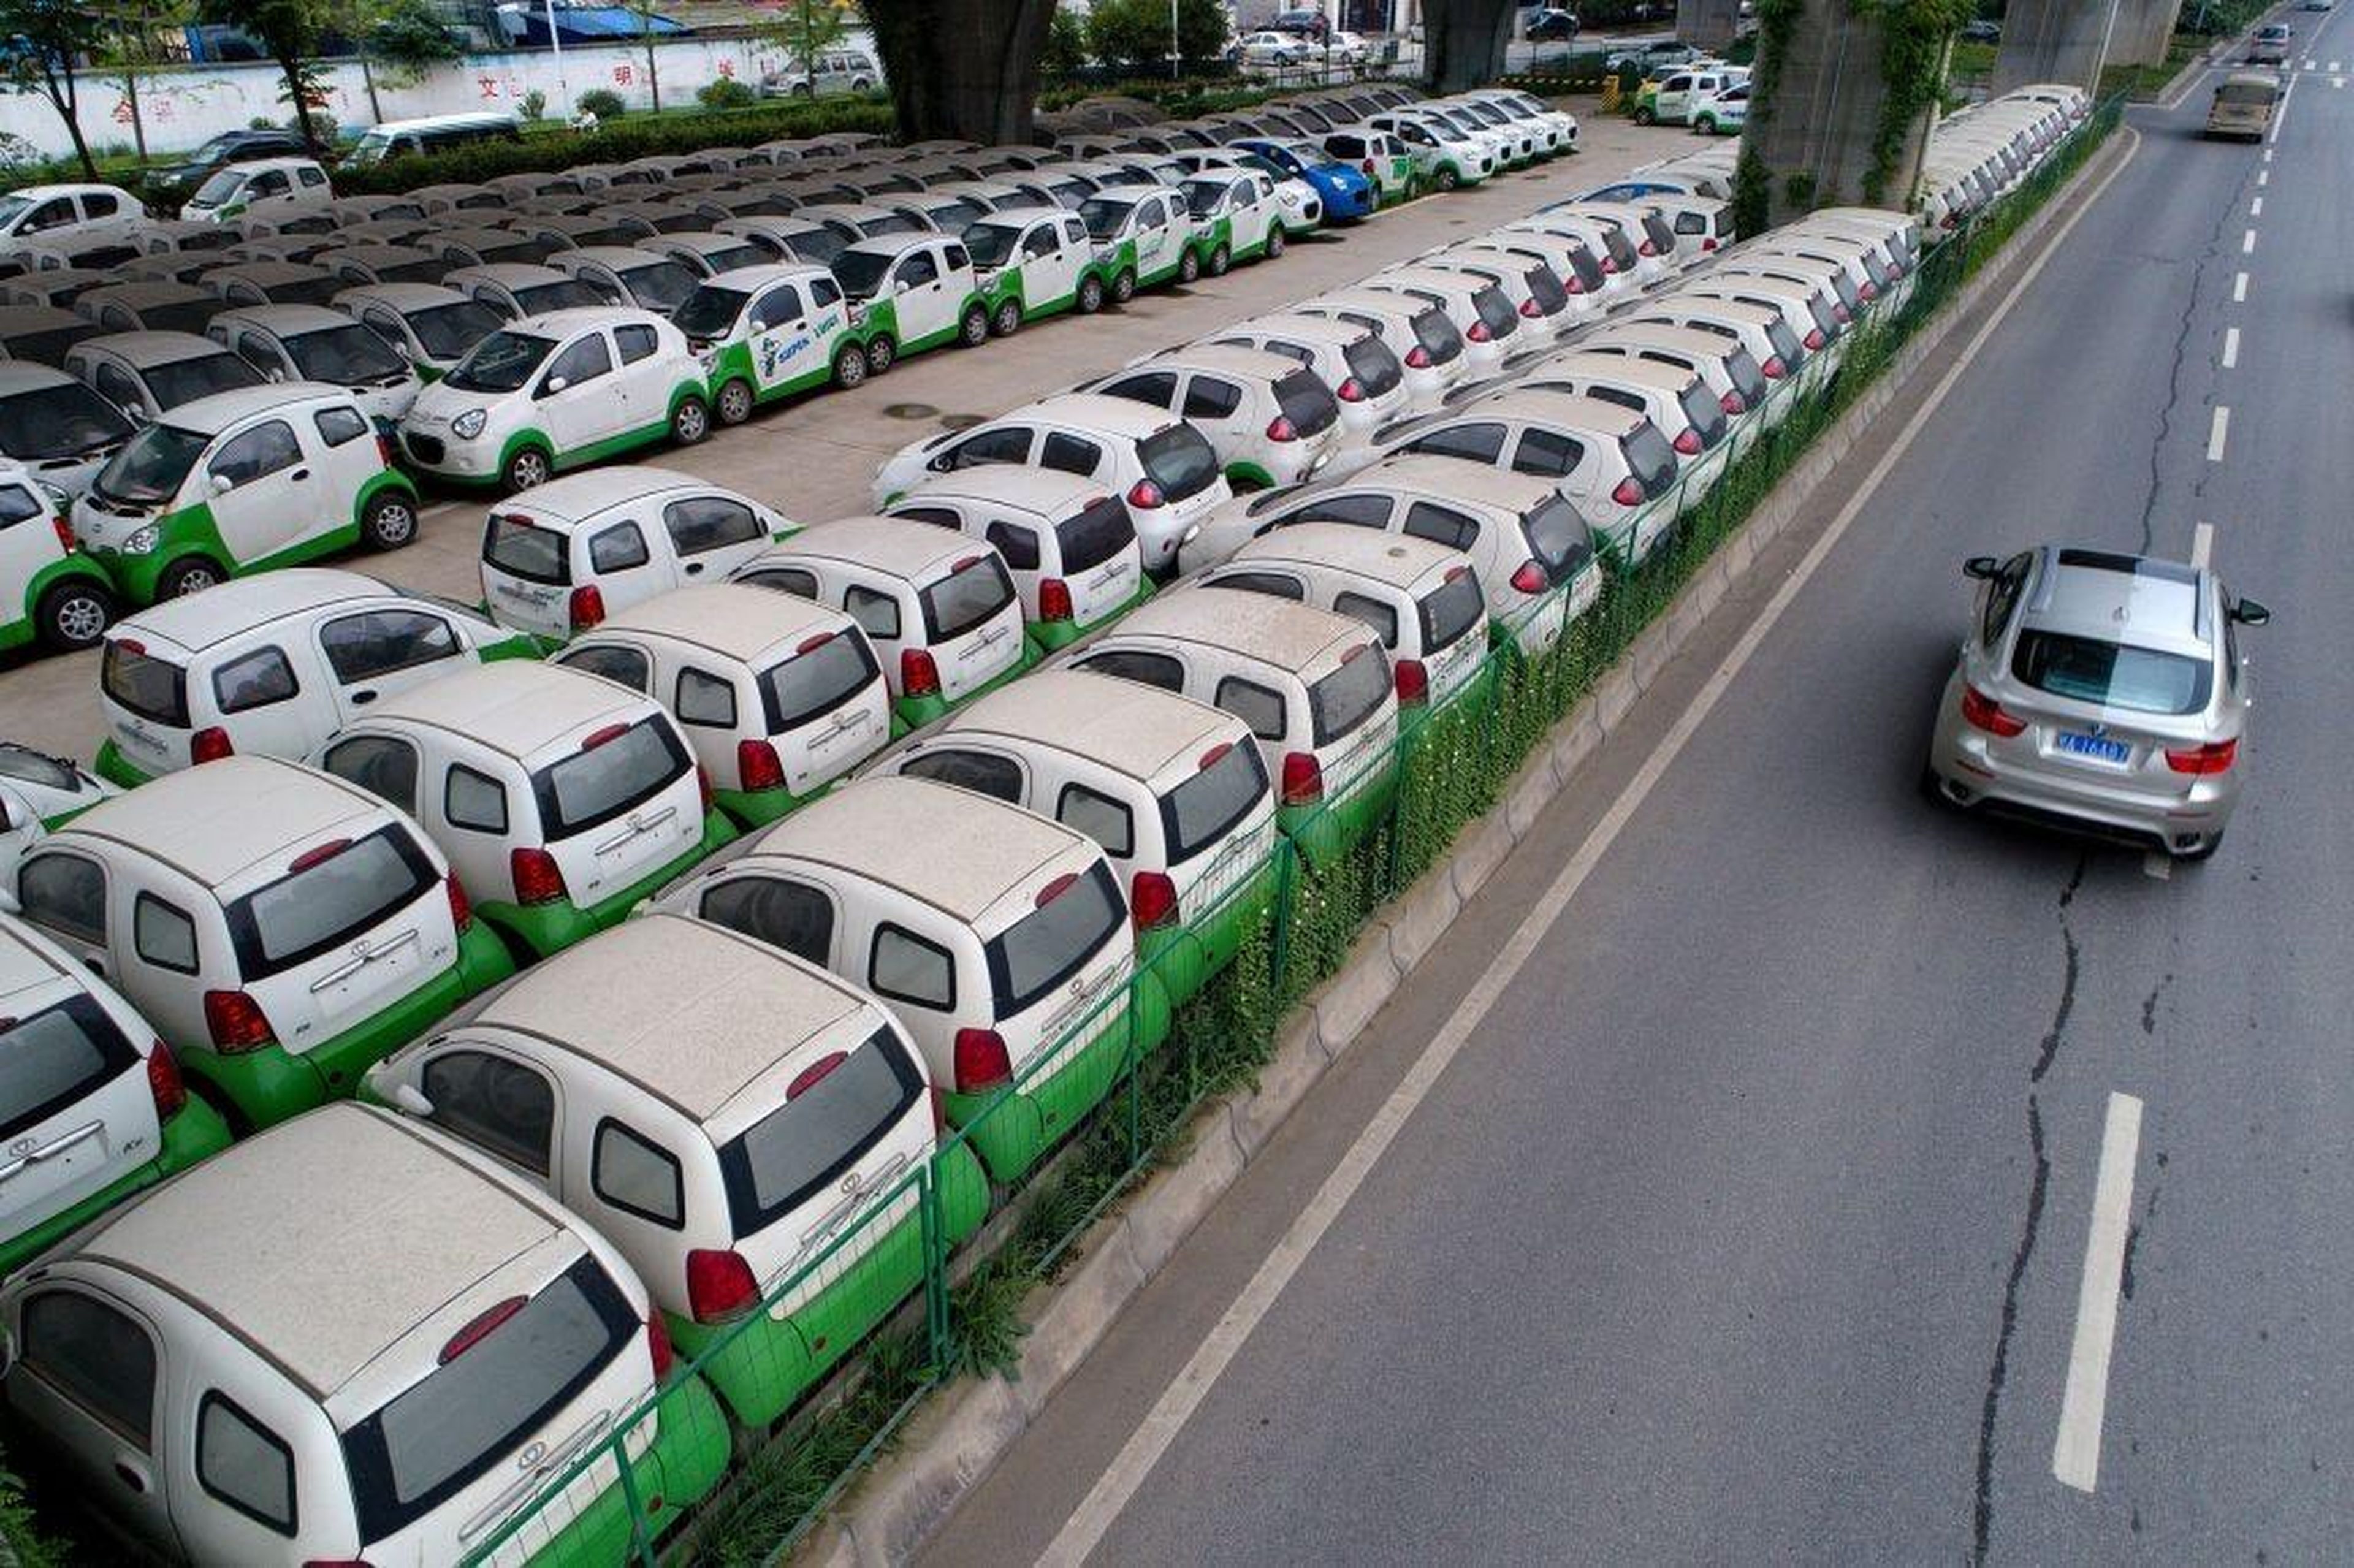 New electric vehicles parked in a parking lot under a viaduct in Wuhan, central China's Hubei province. STR/AFP/Getty Images